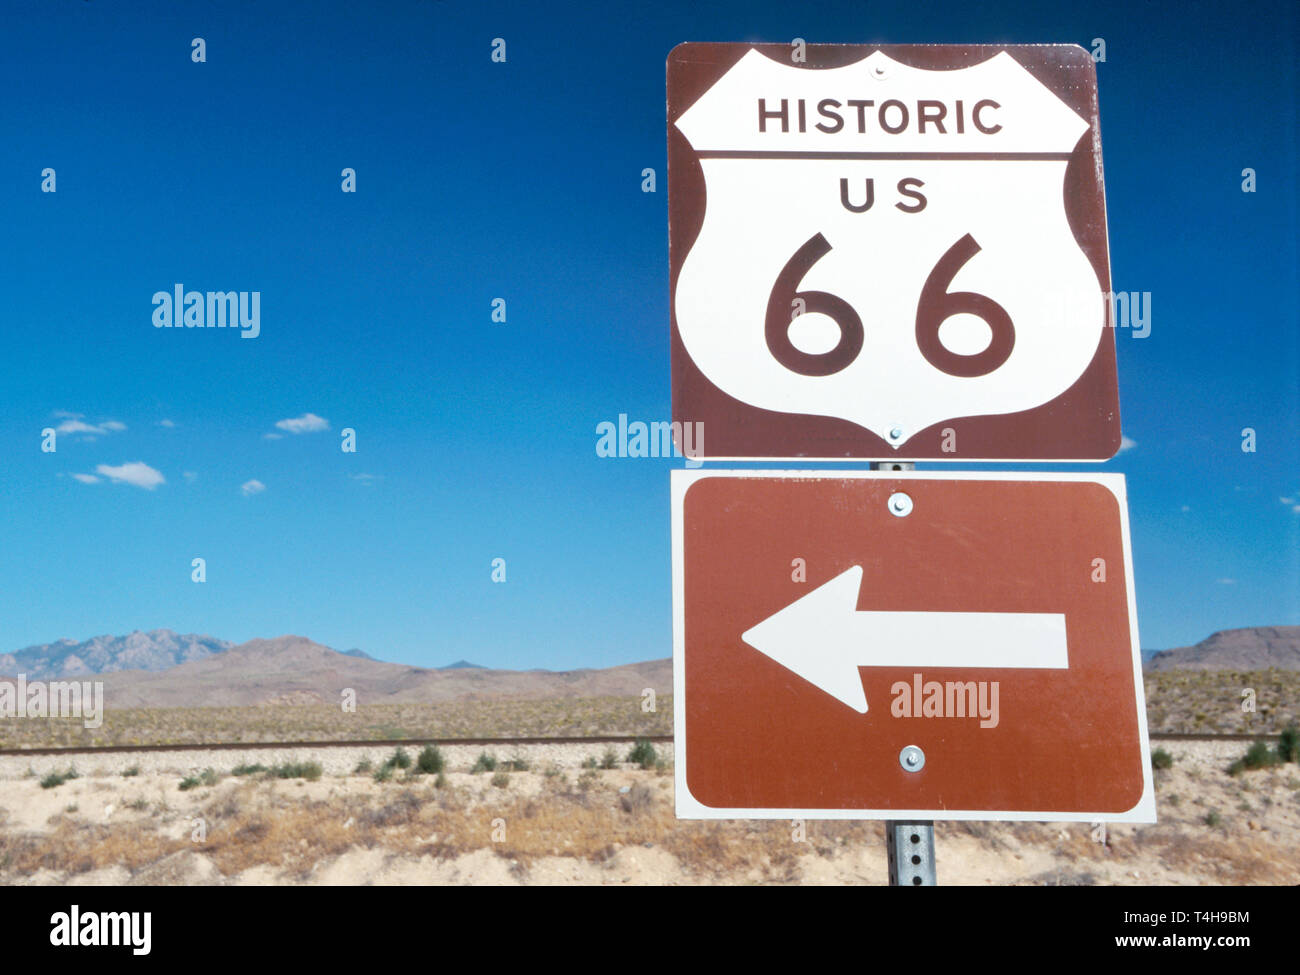 Arizona,AZ,Southwest,West,Grand Canyon State,Kingman,highway Route 66,historic cross country highway,legendary,road sign,information,advertise,market, Stock Photo